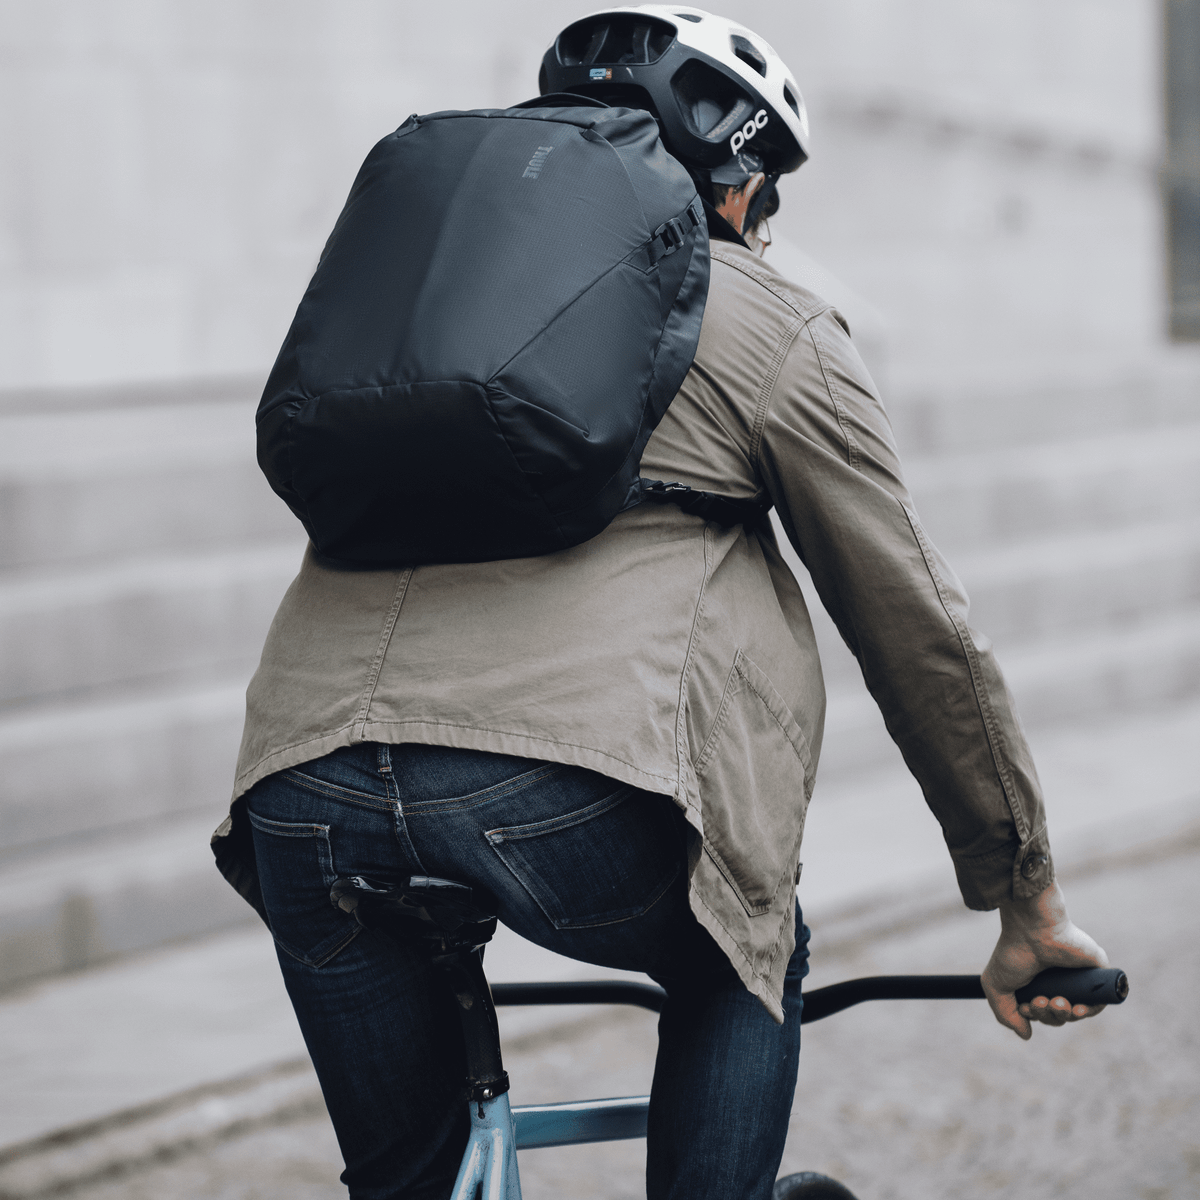 A man bikes down a street with a white helmet and a black Thule Tact backpack.